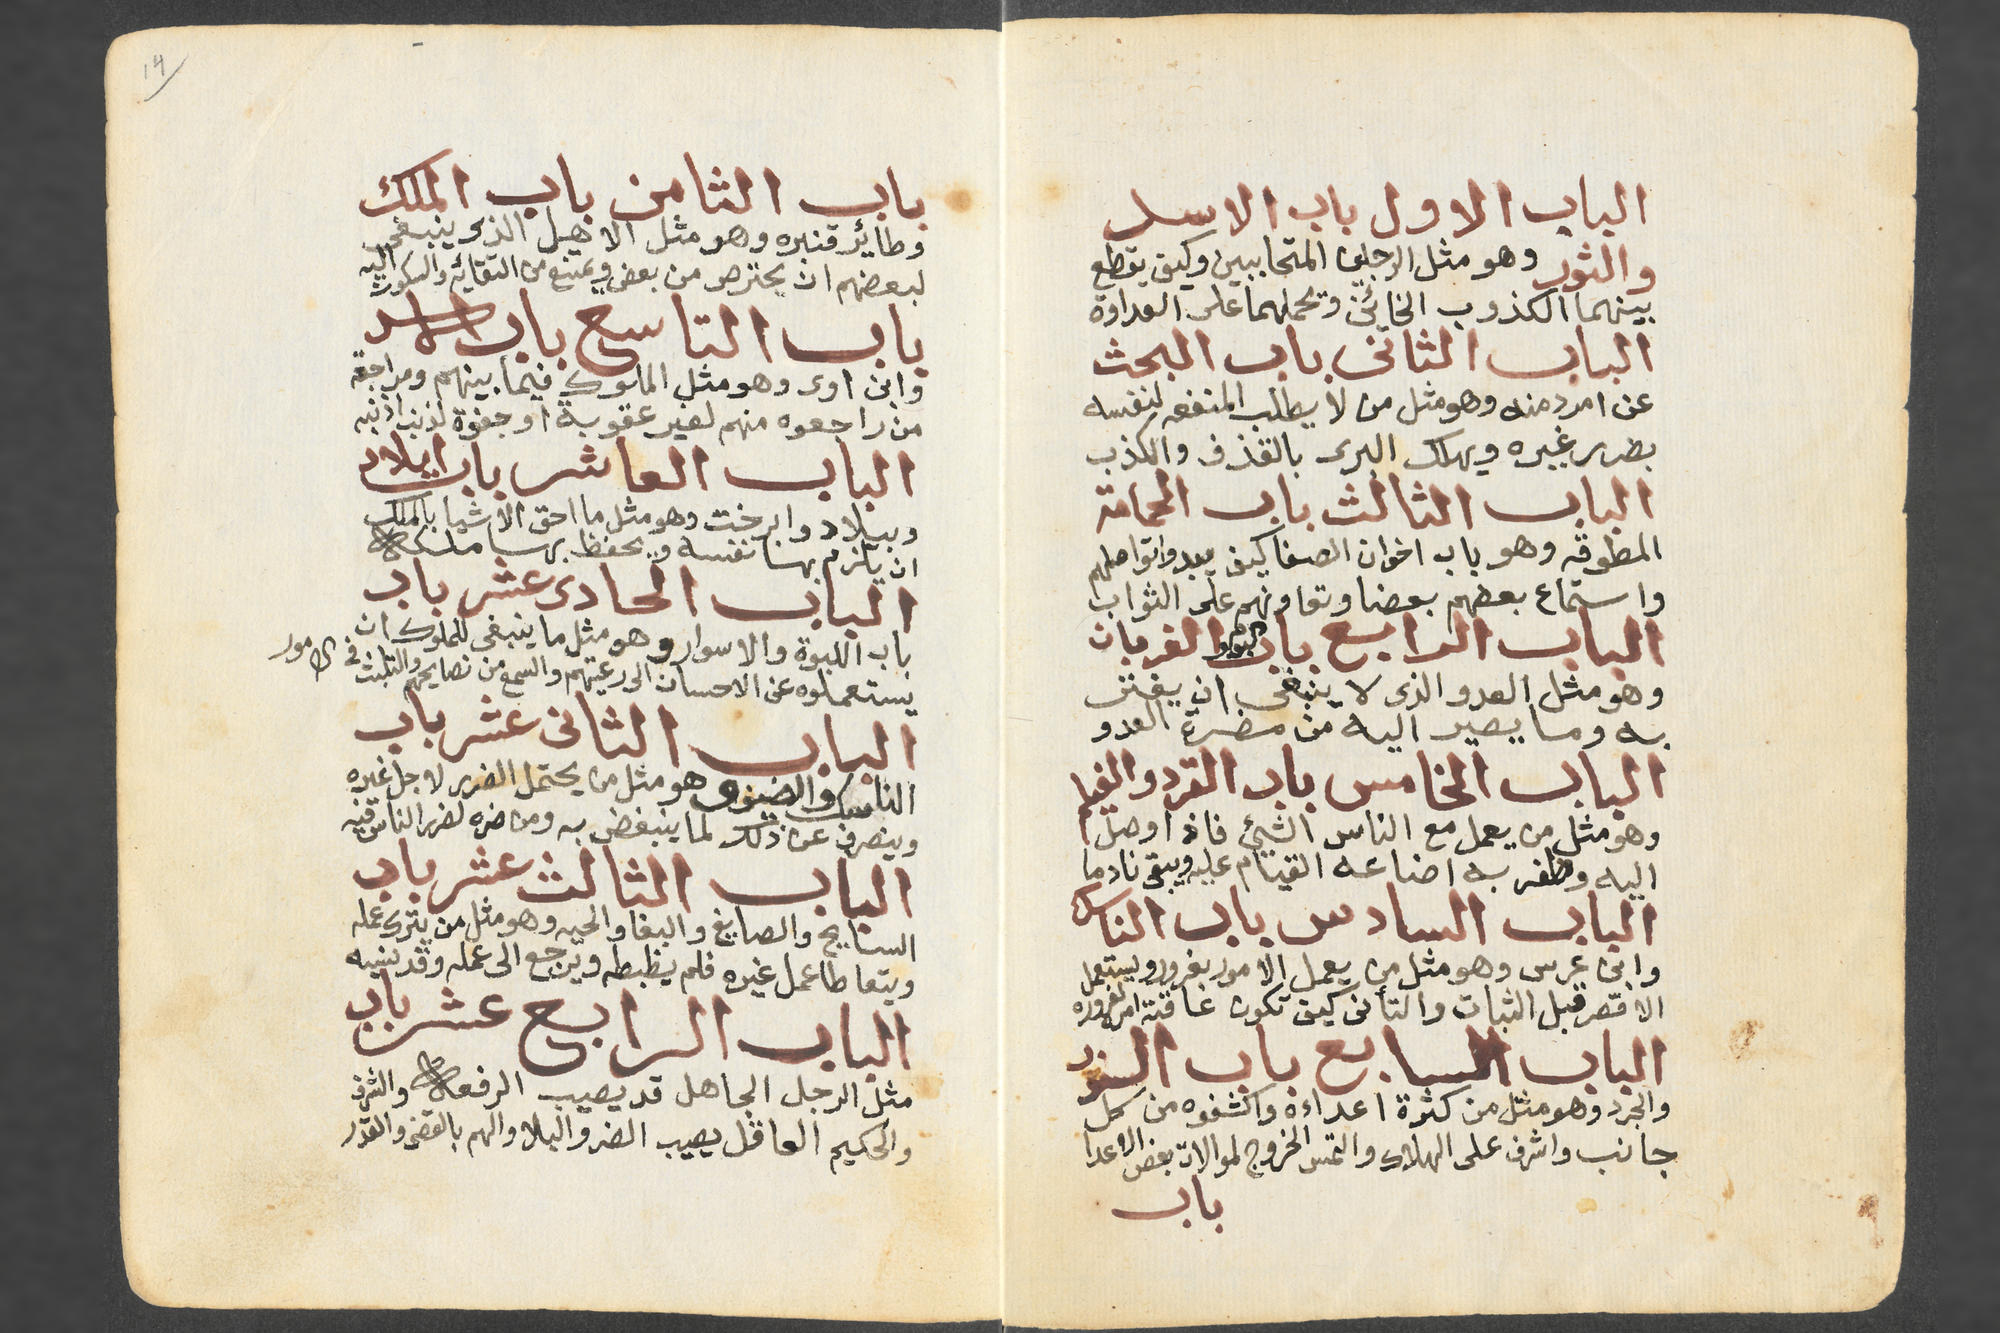 “Kalila and Dimna” is a widely known collection of Arabic fables. This is the list of contents of the edition by Ibn al-Muqaffa’ copied in 1830 by Ahmad al-Rabbat who owned a lending library of popular Arabic literature.